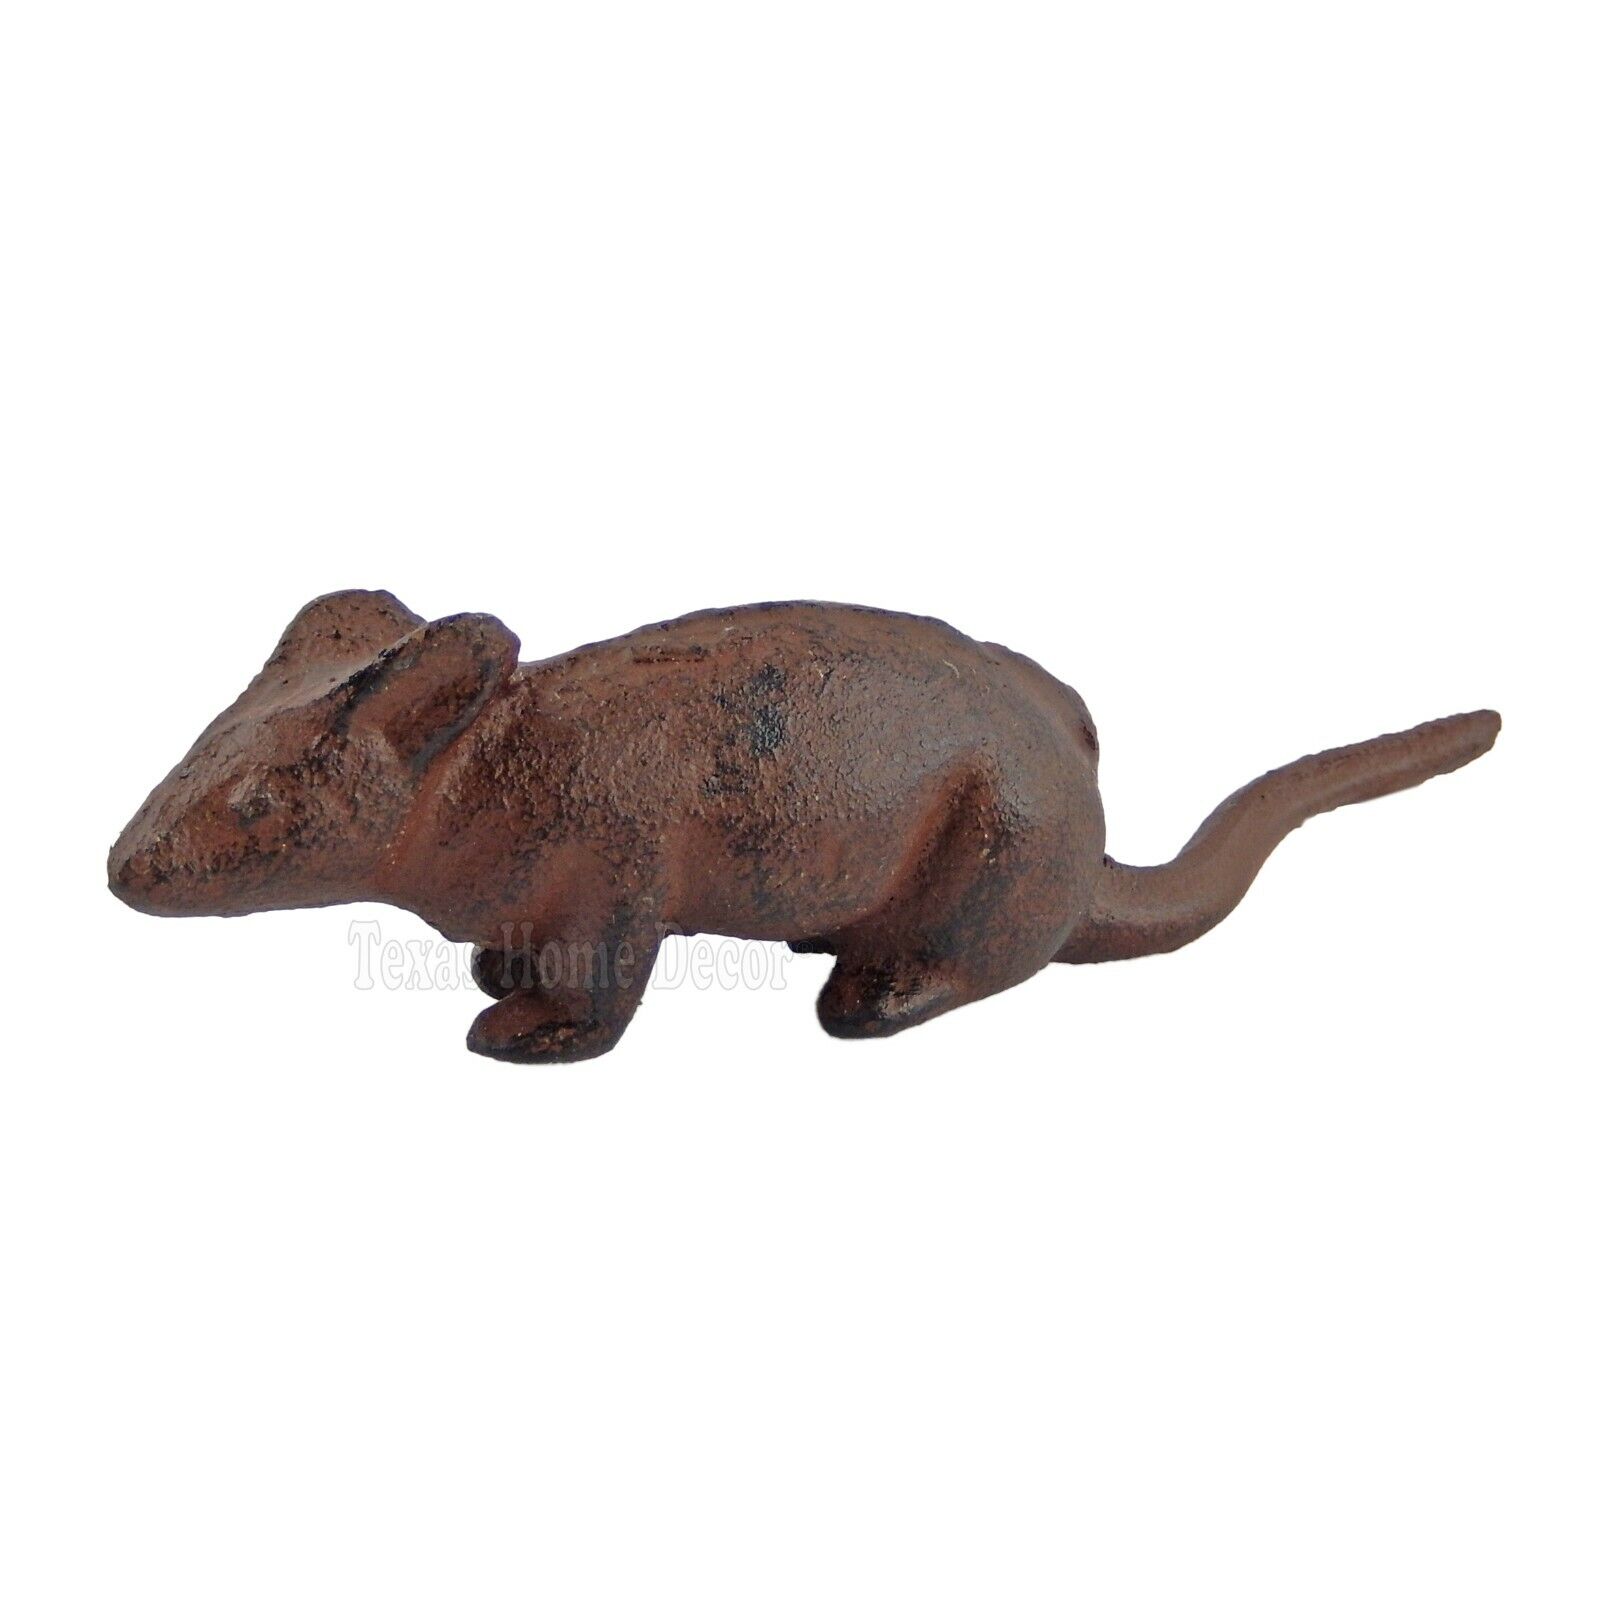 Little Mouse Figurine Statue Cast Iron Rustic Brown Finish Paper Weight 5\